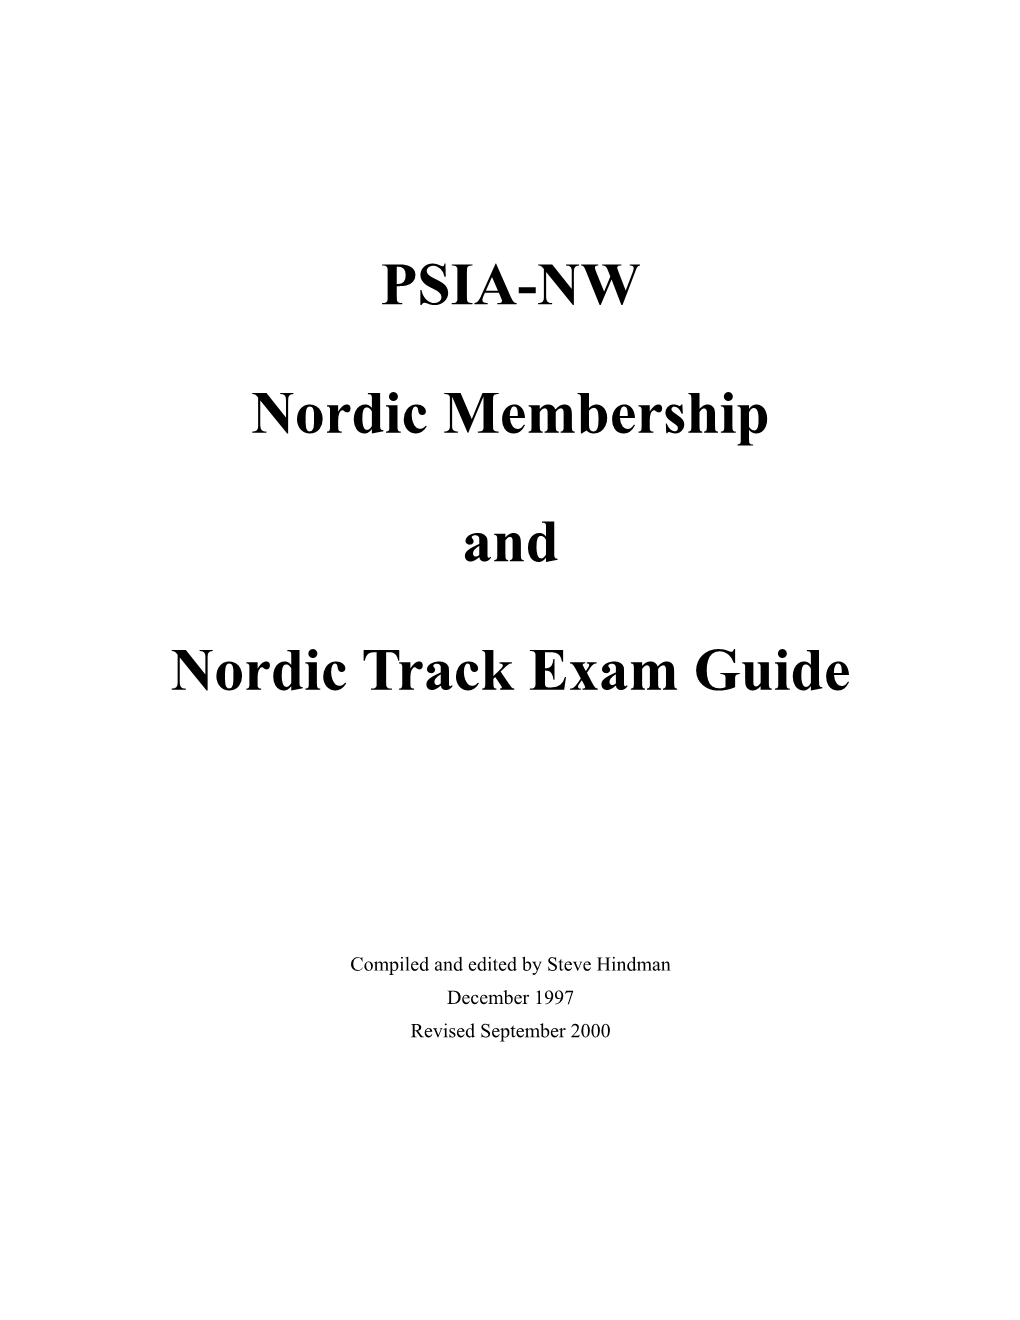 PSIA-NW Nordic Membership and Nordic Track Exam Guide